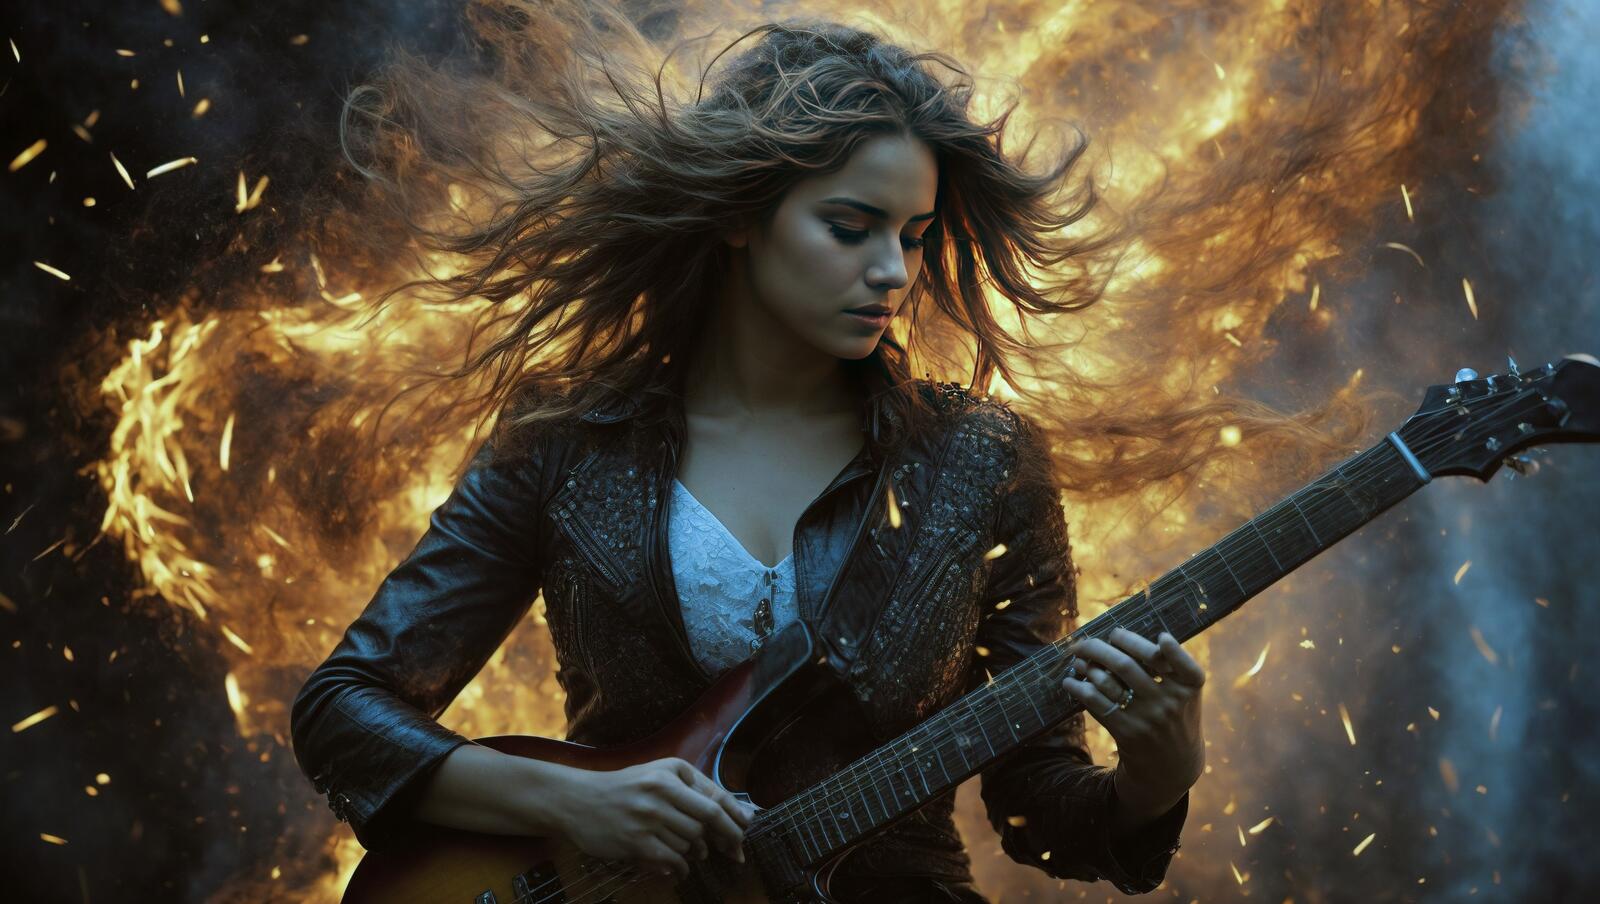 Free photo A woman with a guitar against a background of fire and clouds